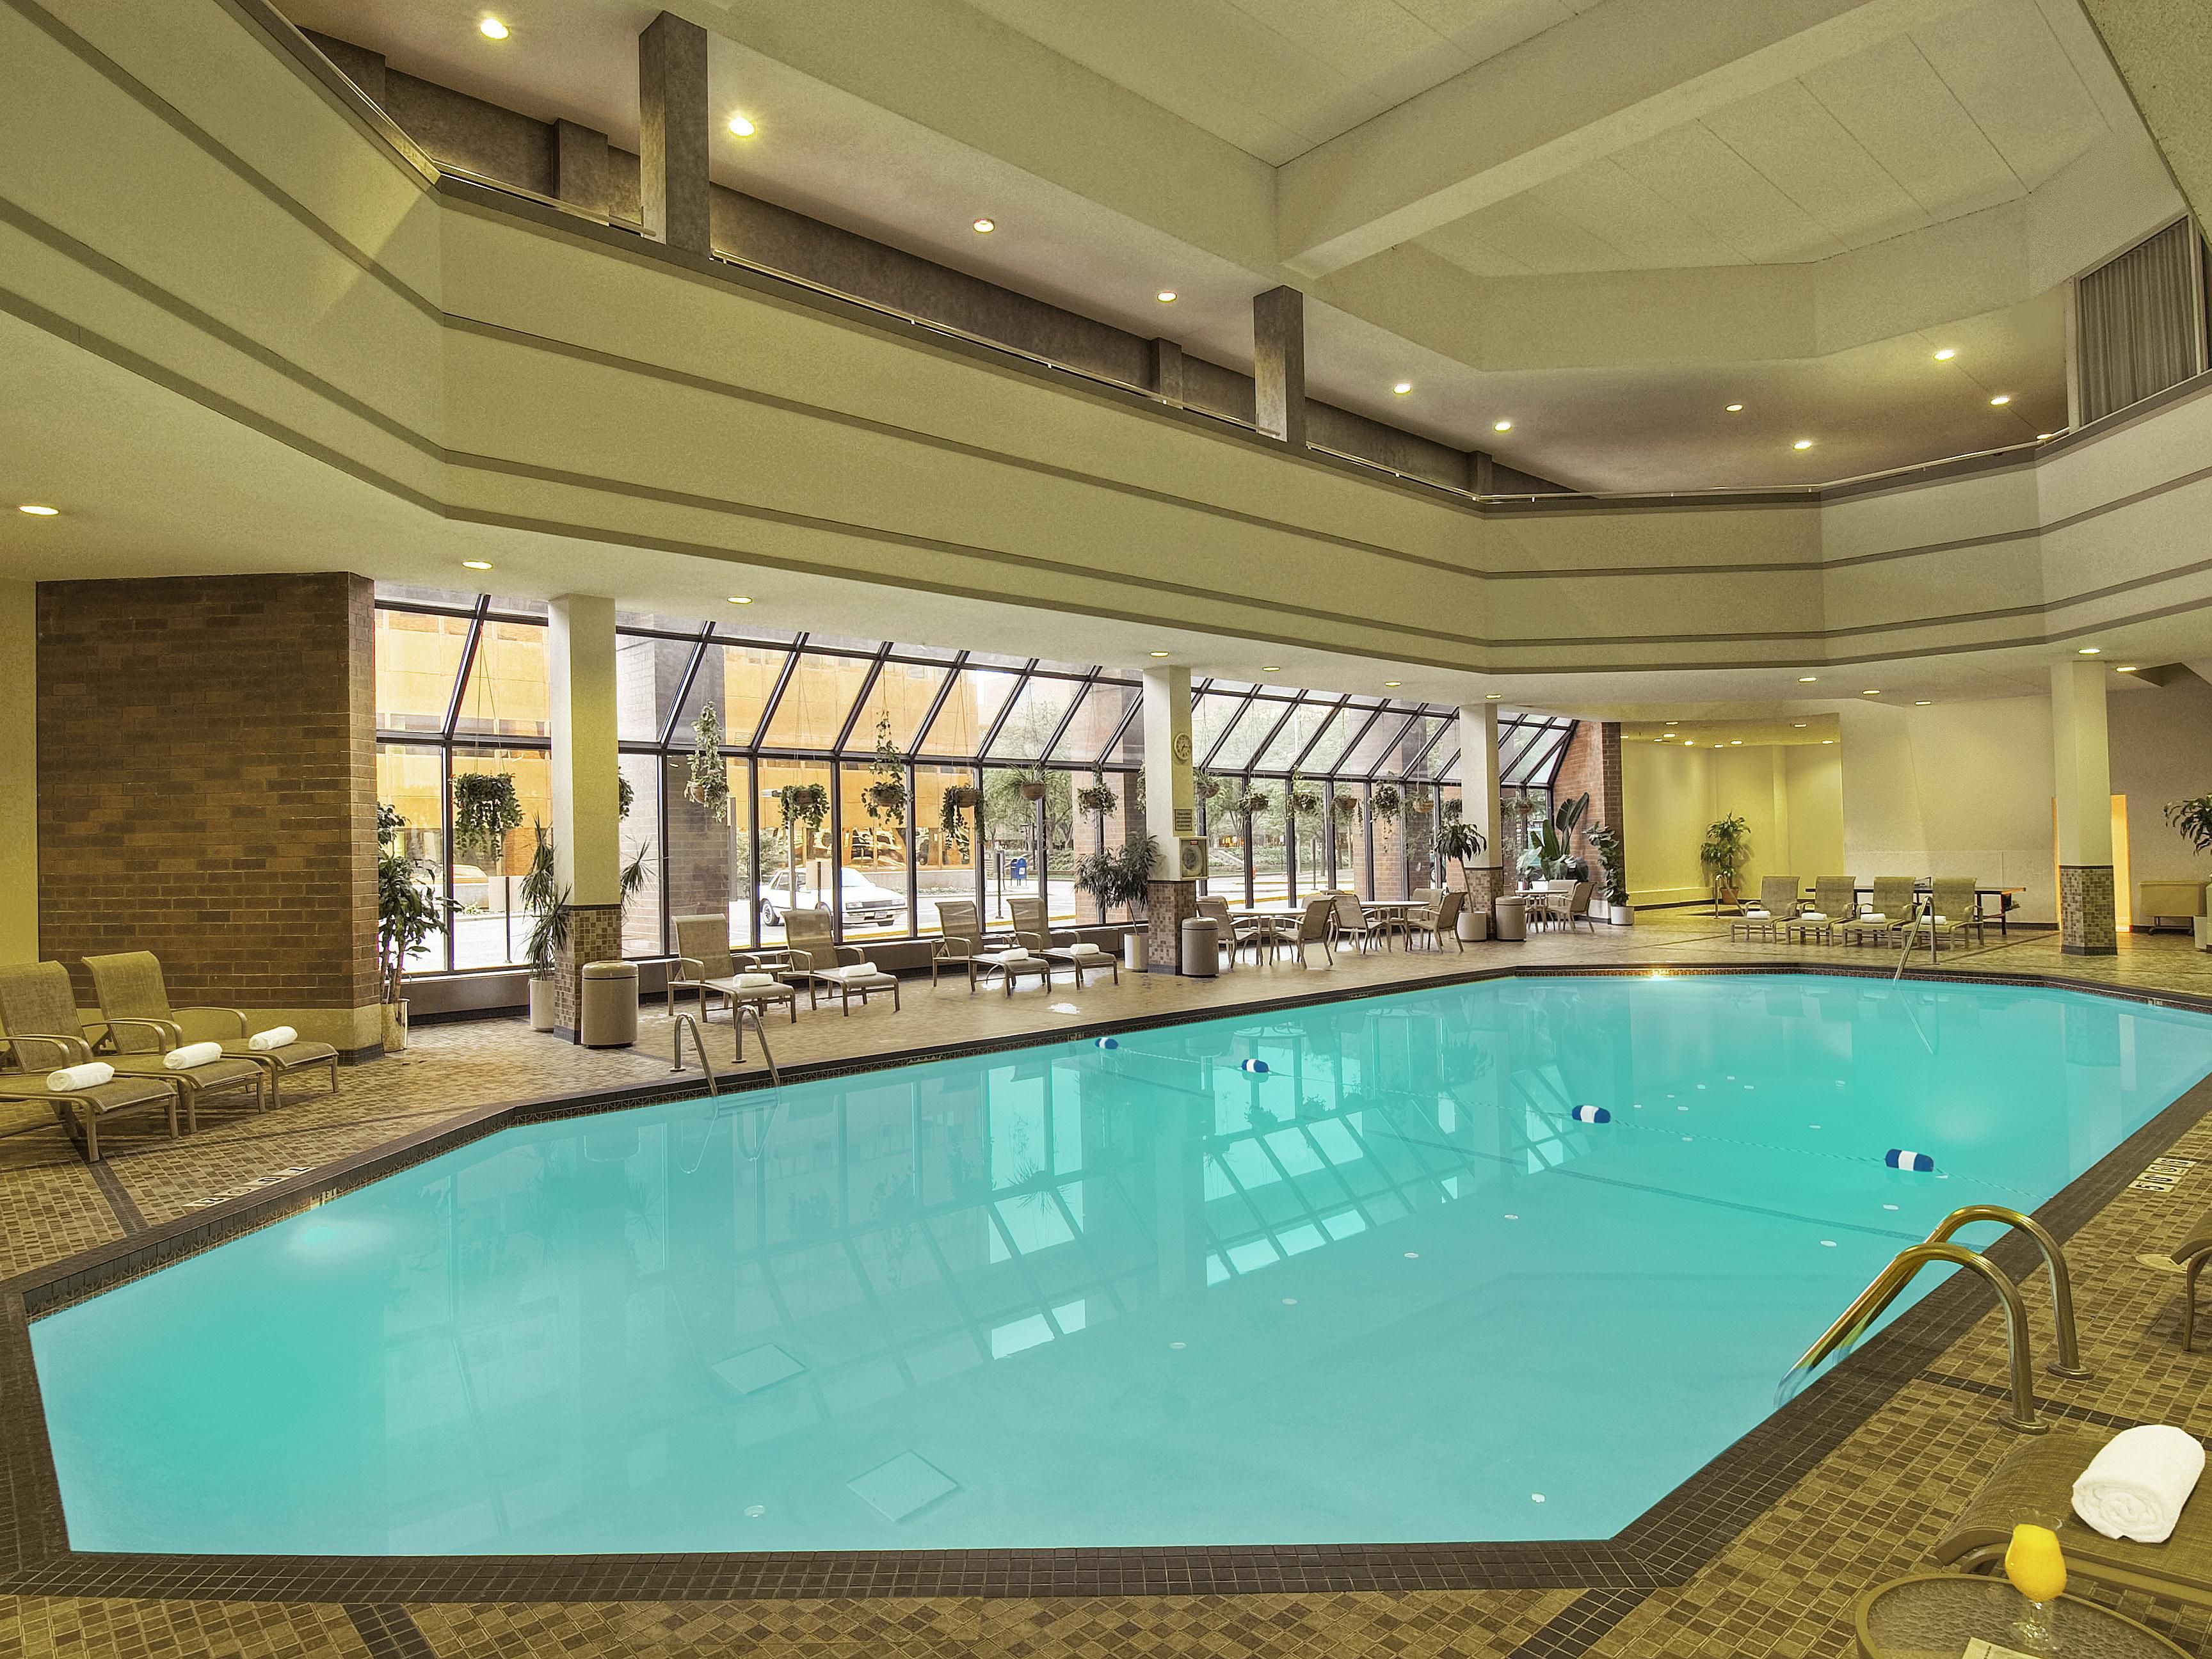 Relax and rejuvenate with a refreshing dip in our indoor pool, complete with comfortable lounge chairs and ample natural lighting. Start your day with an invigorating swim and end it with a soothing soak in our hot tub. Pool hours are from 7:00 AM to 11:00 PM.